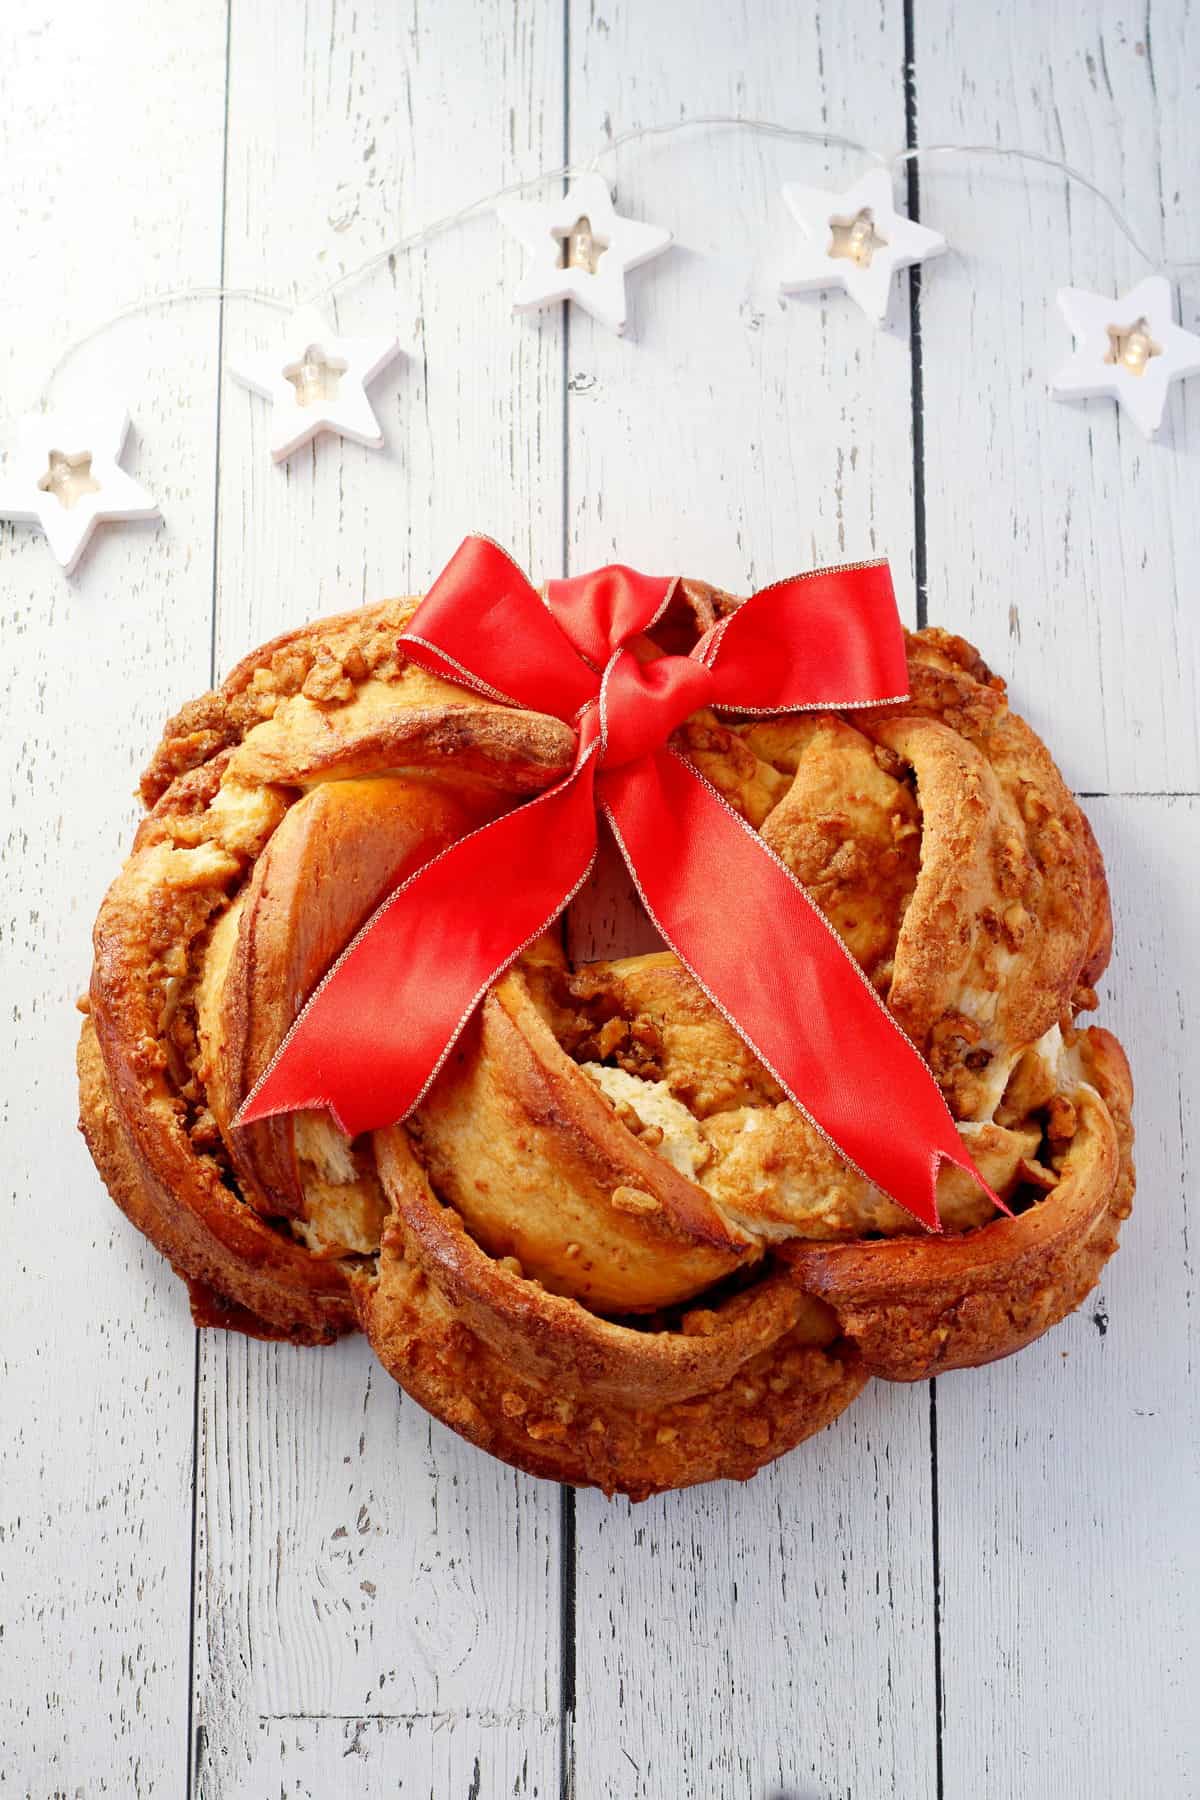 Holiday braided bread with walnuts and cinnamon filling